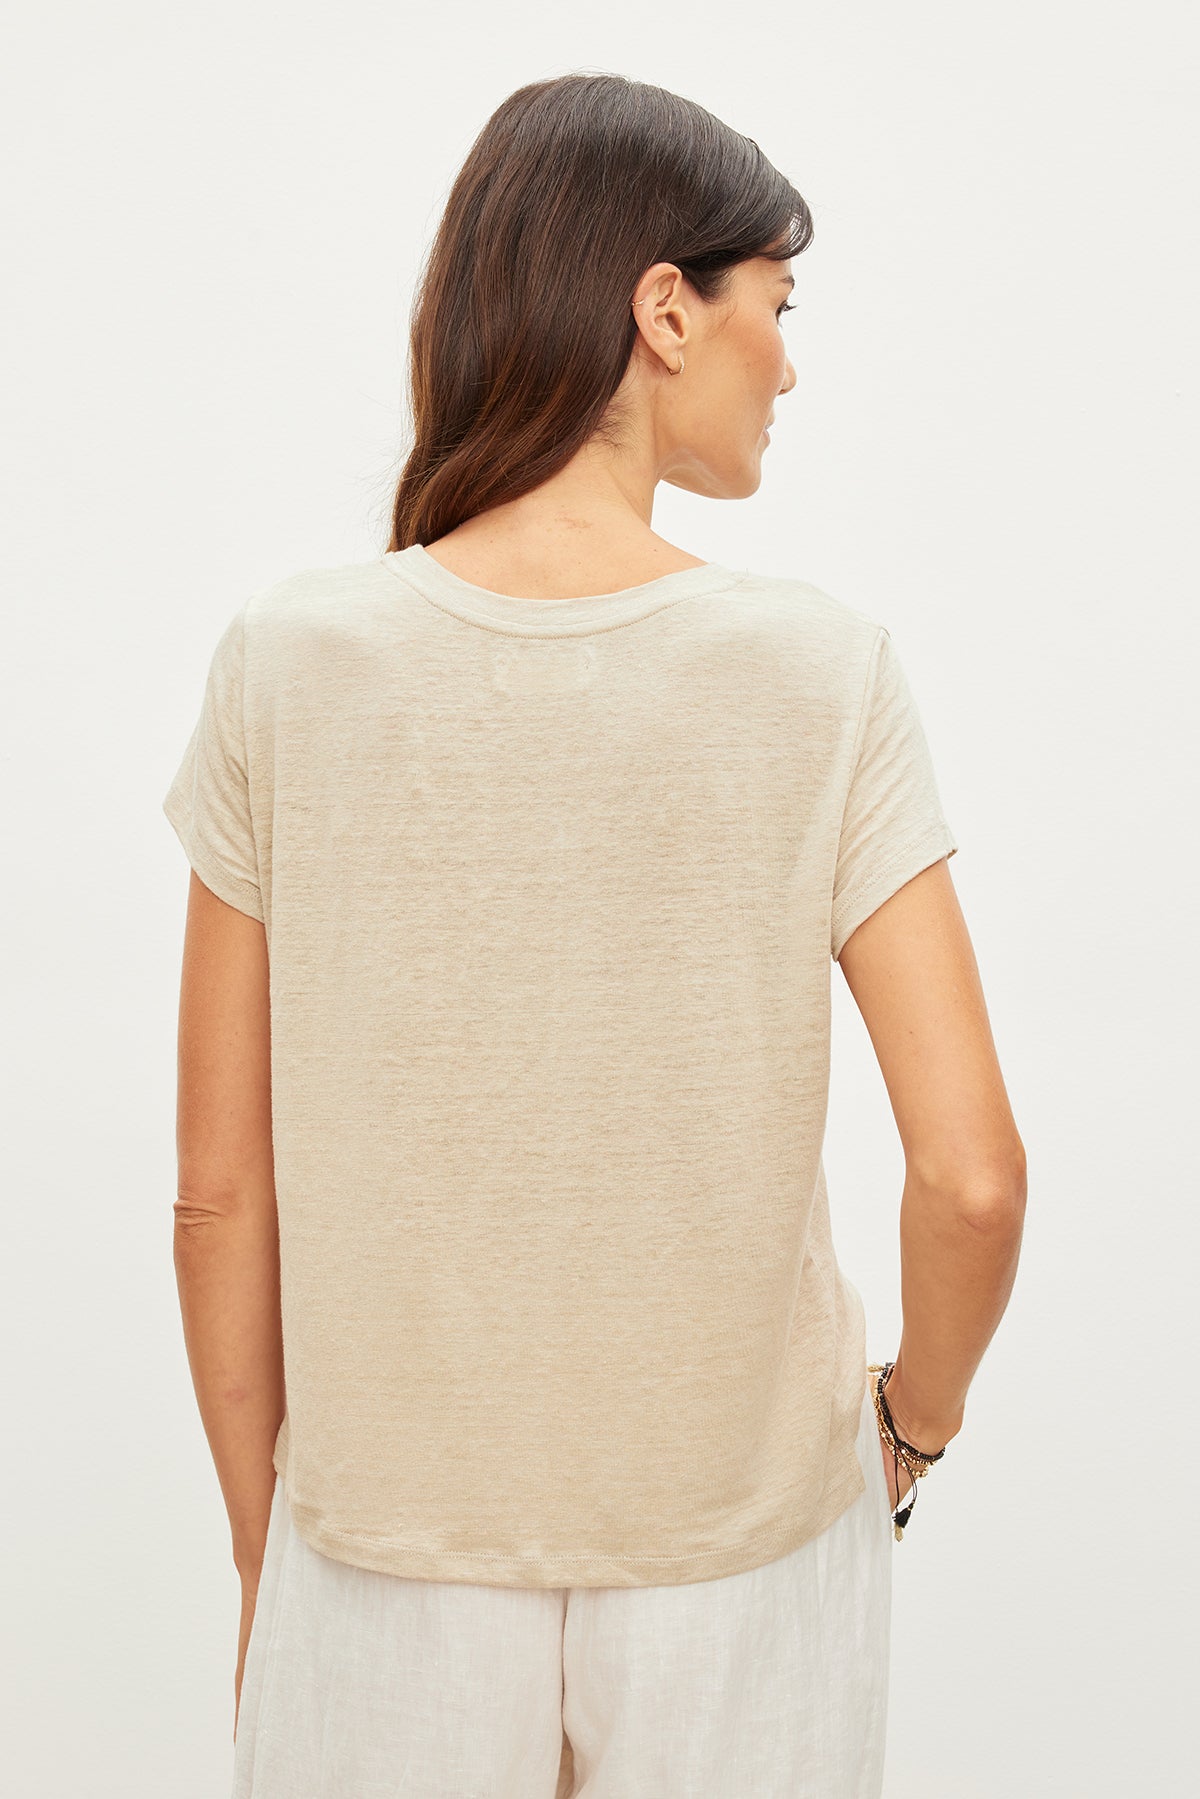   The back view of a woman wearing the Casey Linen Knit Crew Neck Tee in beige, a must-have wardrobe essential by Velvet by Graham & Spencer. 